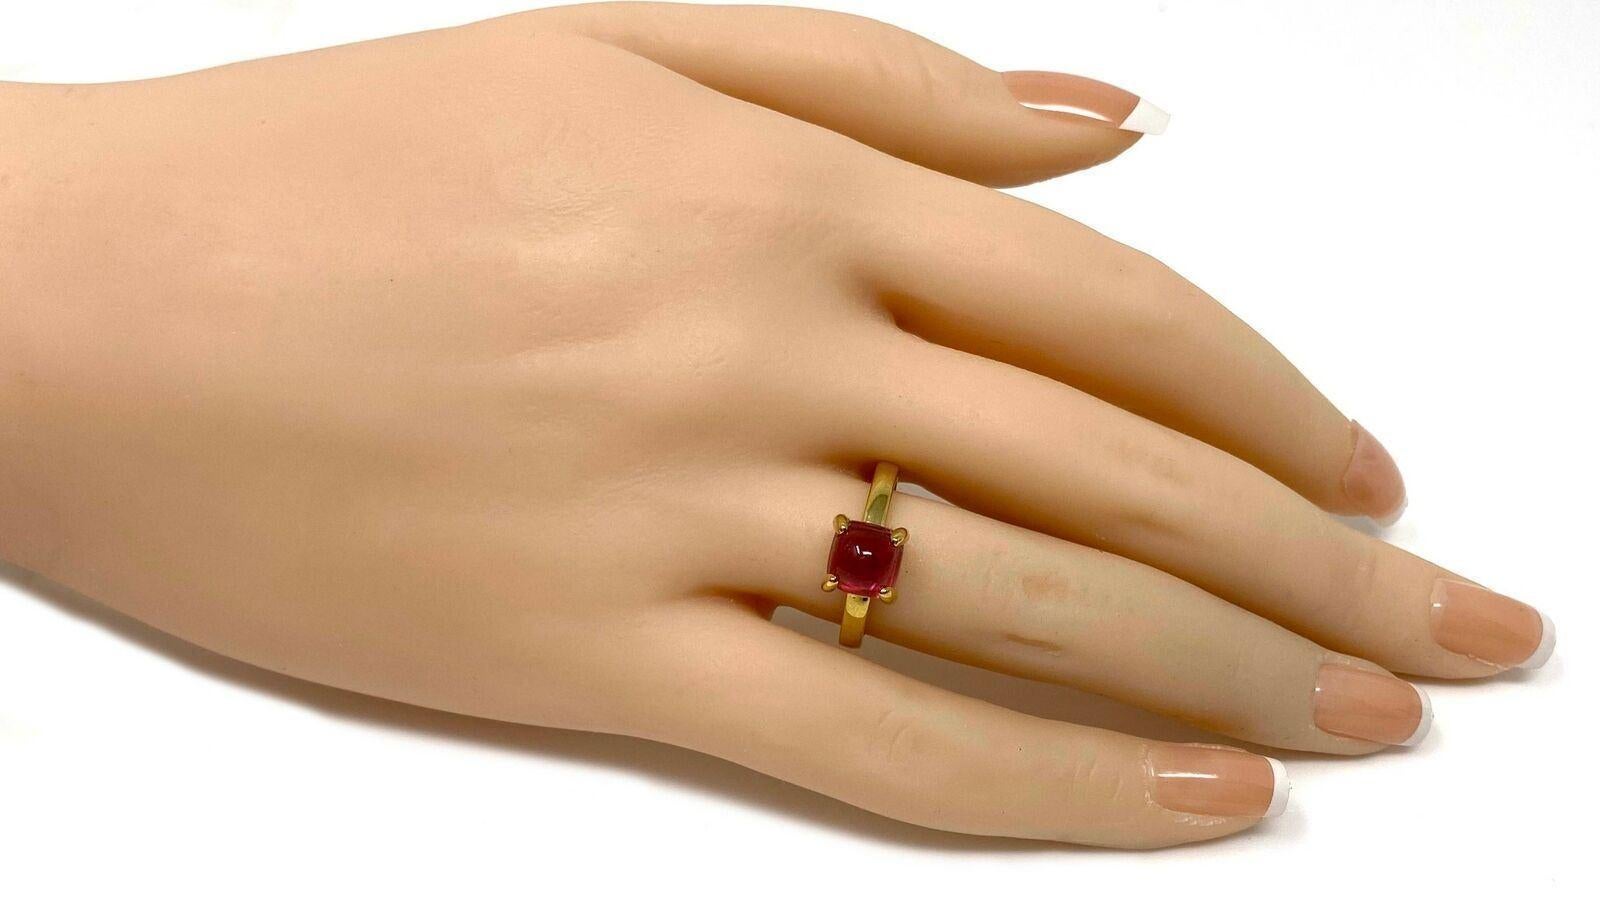 This is a lovely authentic solitaire stone ring from Tiffany & Co. by designer Paloma Picasso from her Sugar Stacks collection. It is crafted from 18k yellow gold with a polished finish featuring a cabochon rubellite gemstone mounted in four sturdy